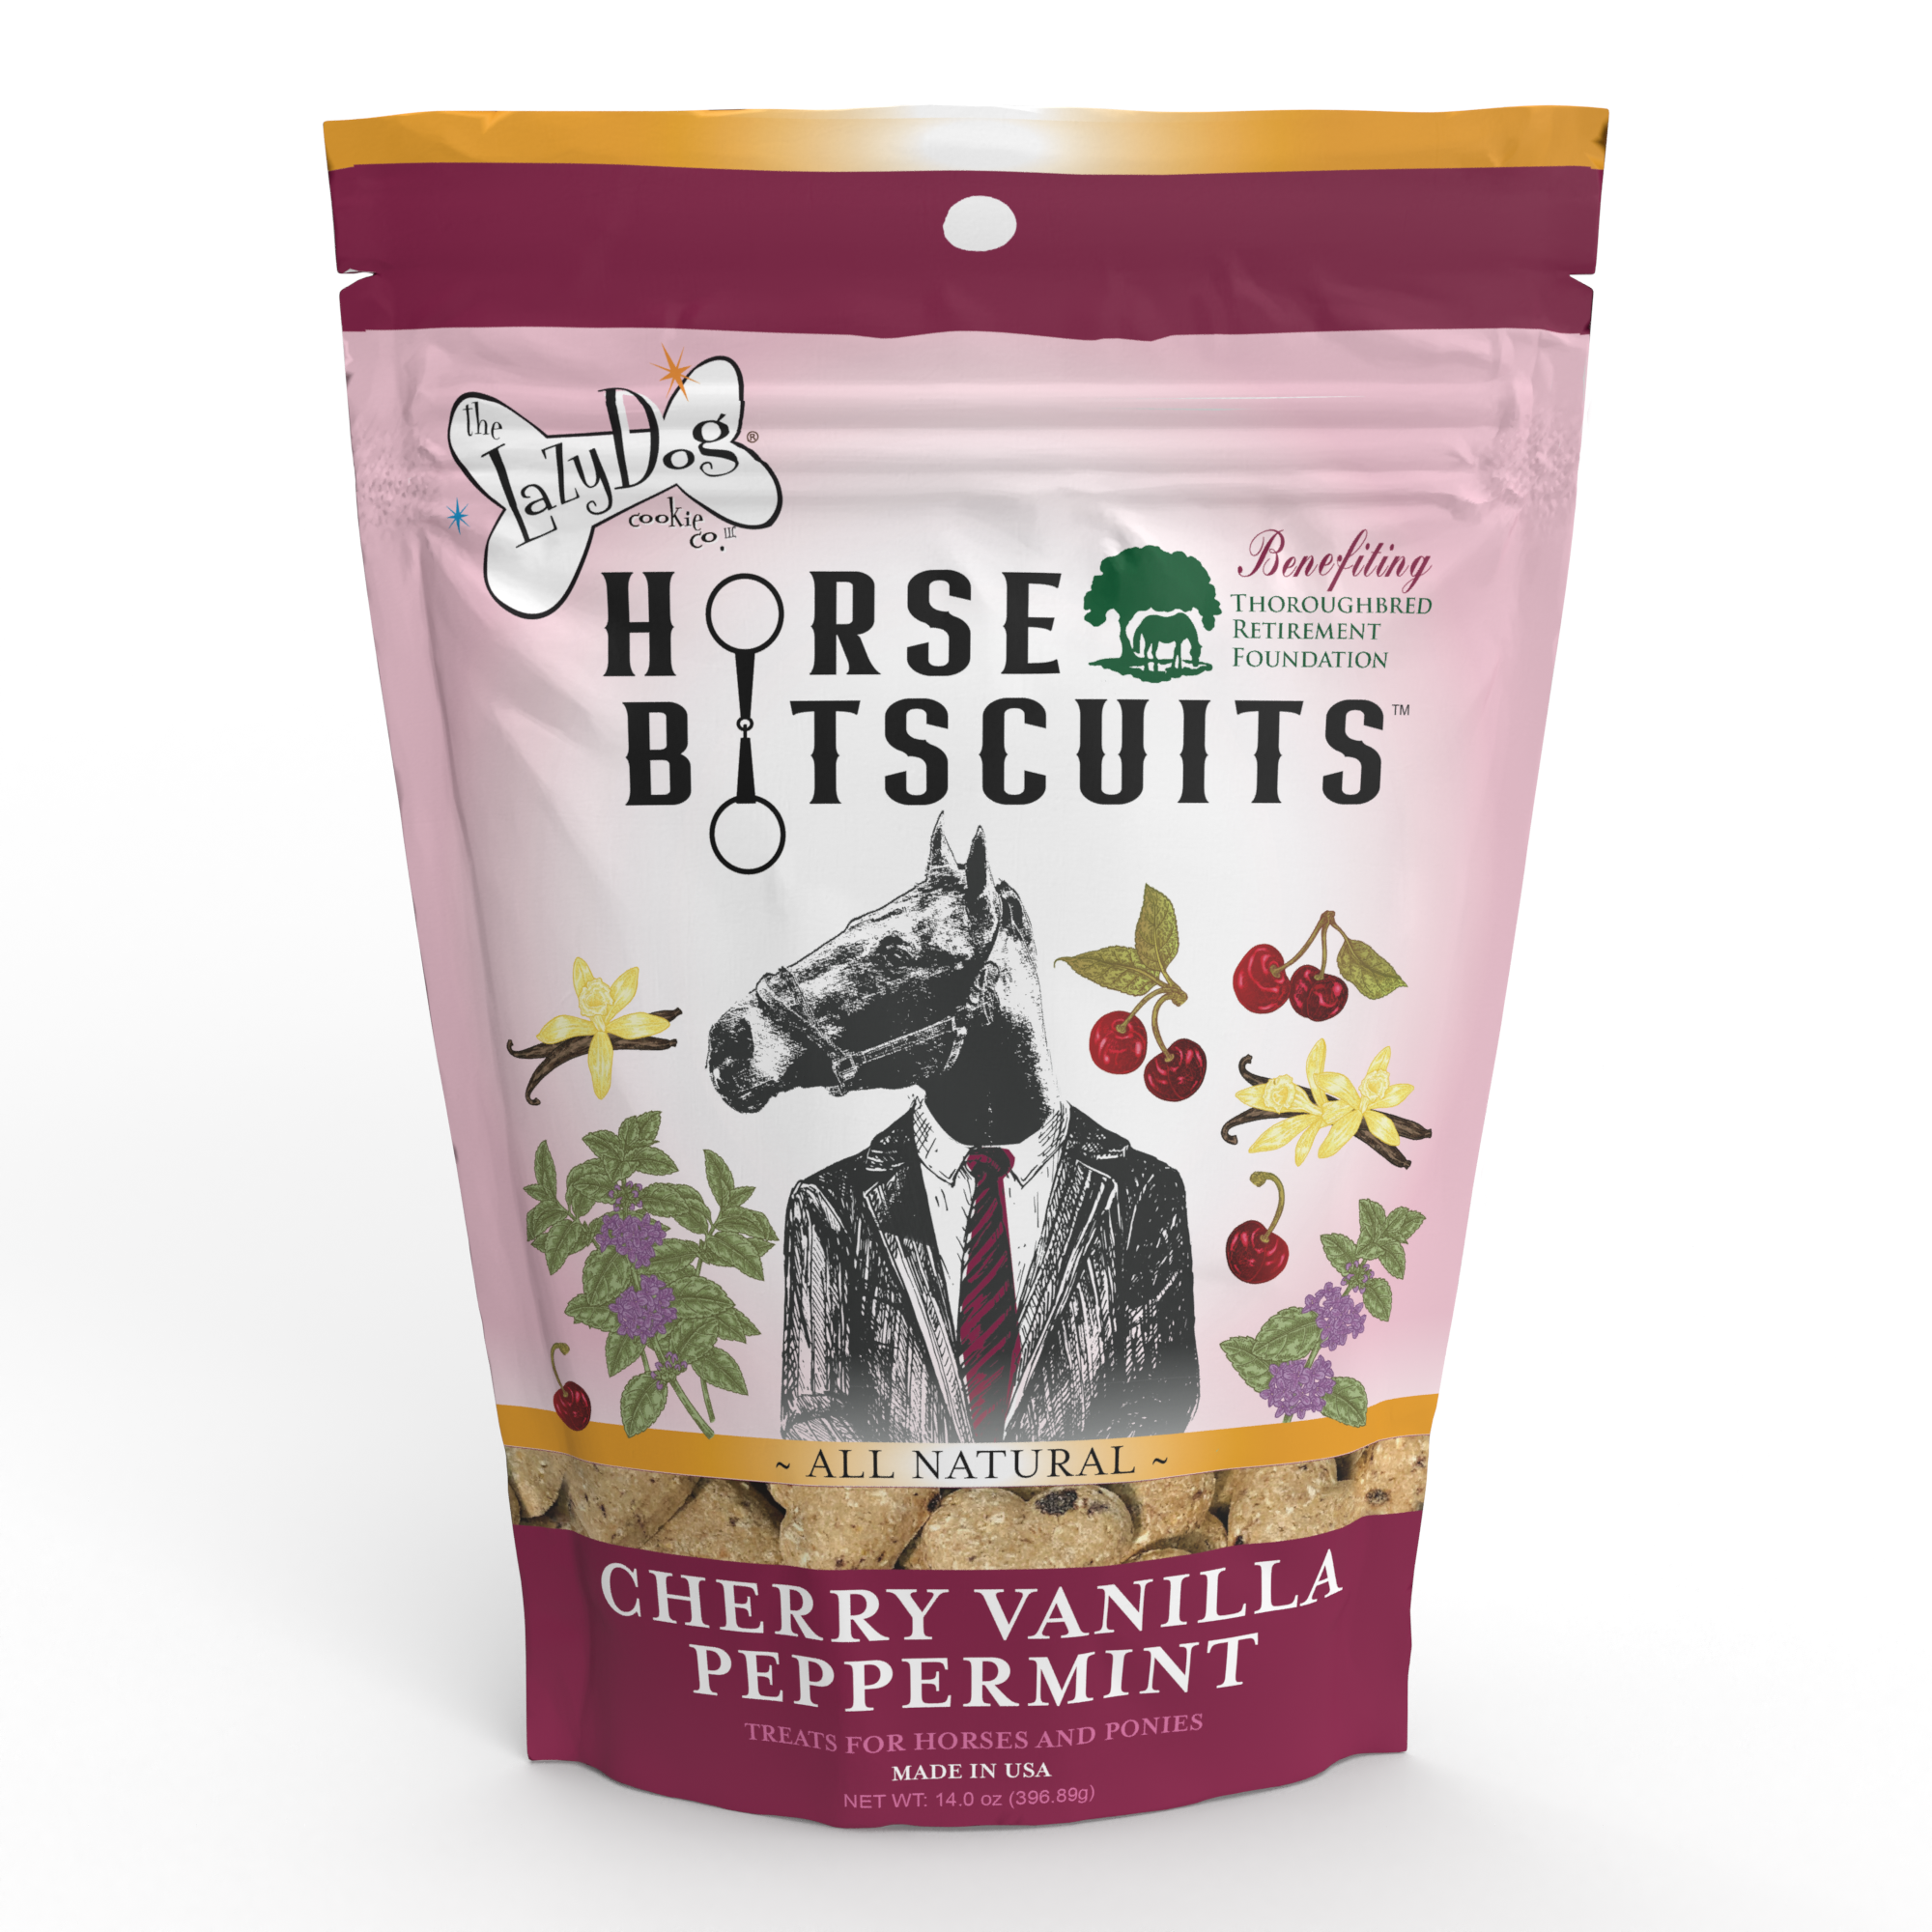 Cherry Dog – Peppermint Horse Cookie Vanilla Co The Lazy Bitscuits™